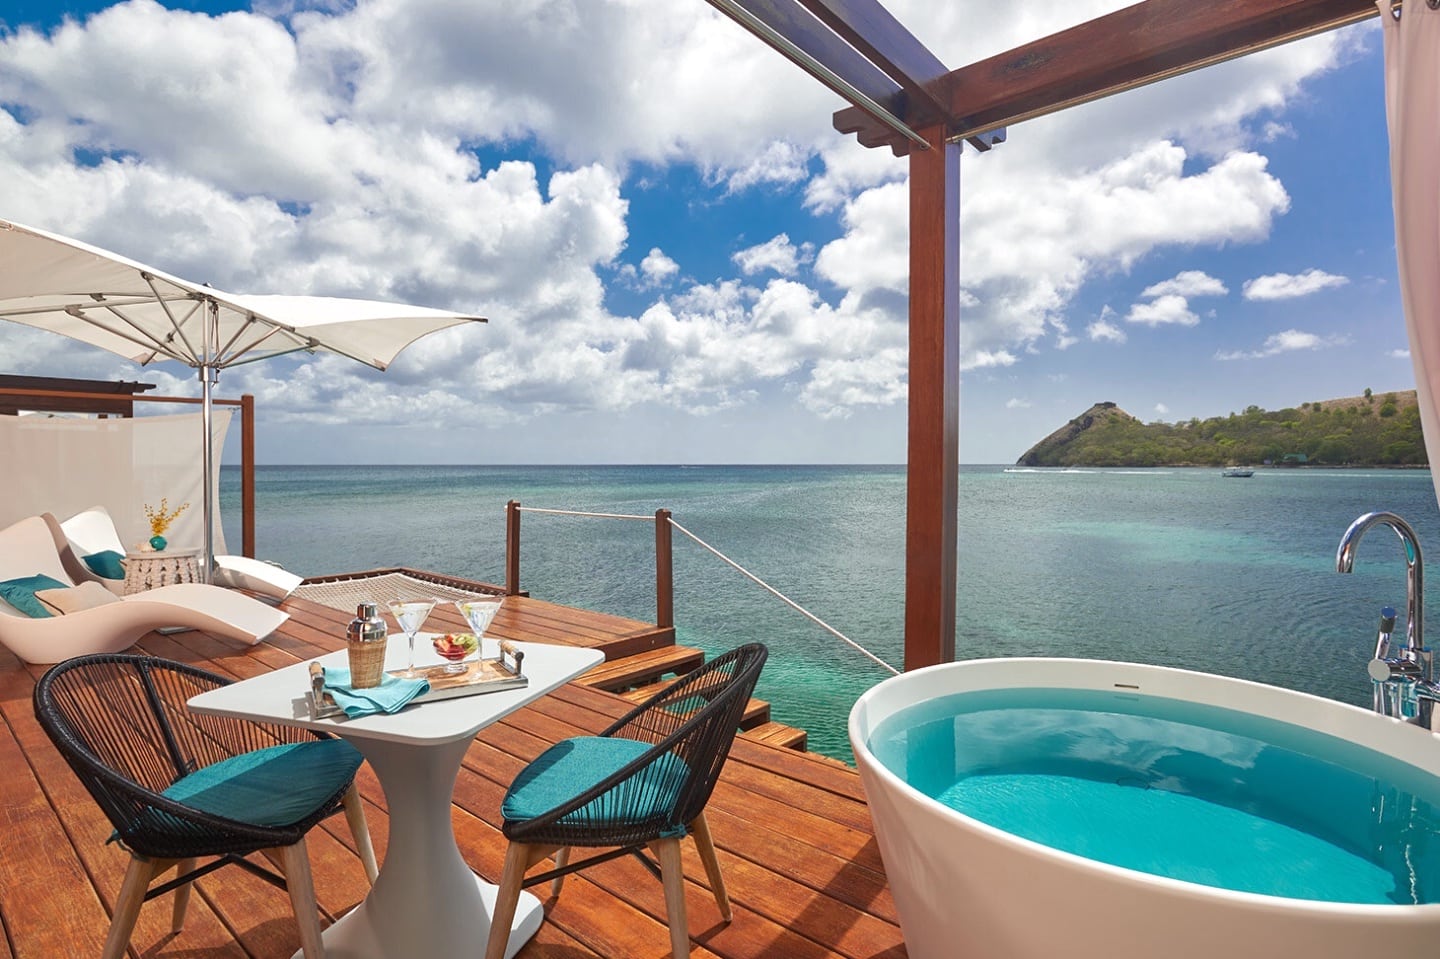 soaking tub and patio set on deck overlooking Caribbean